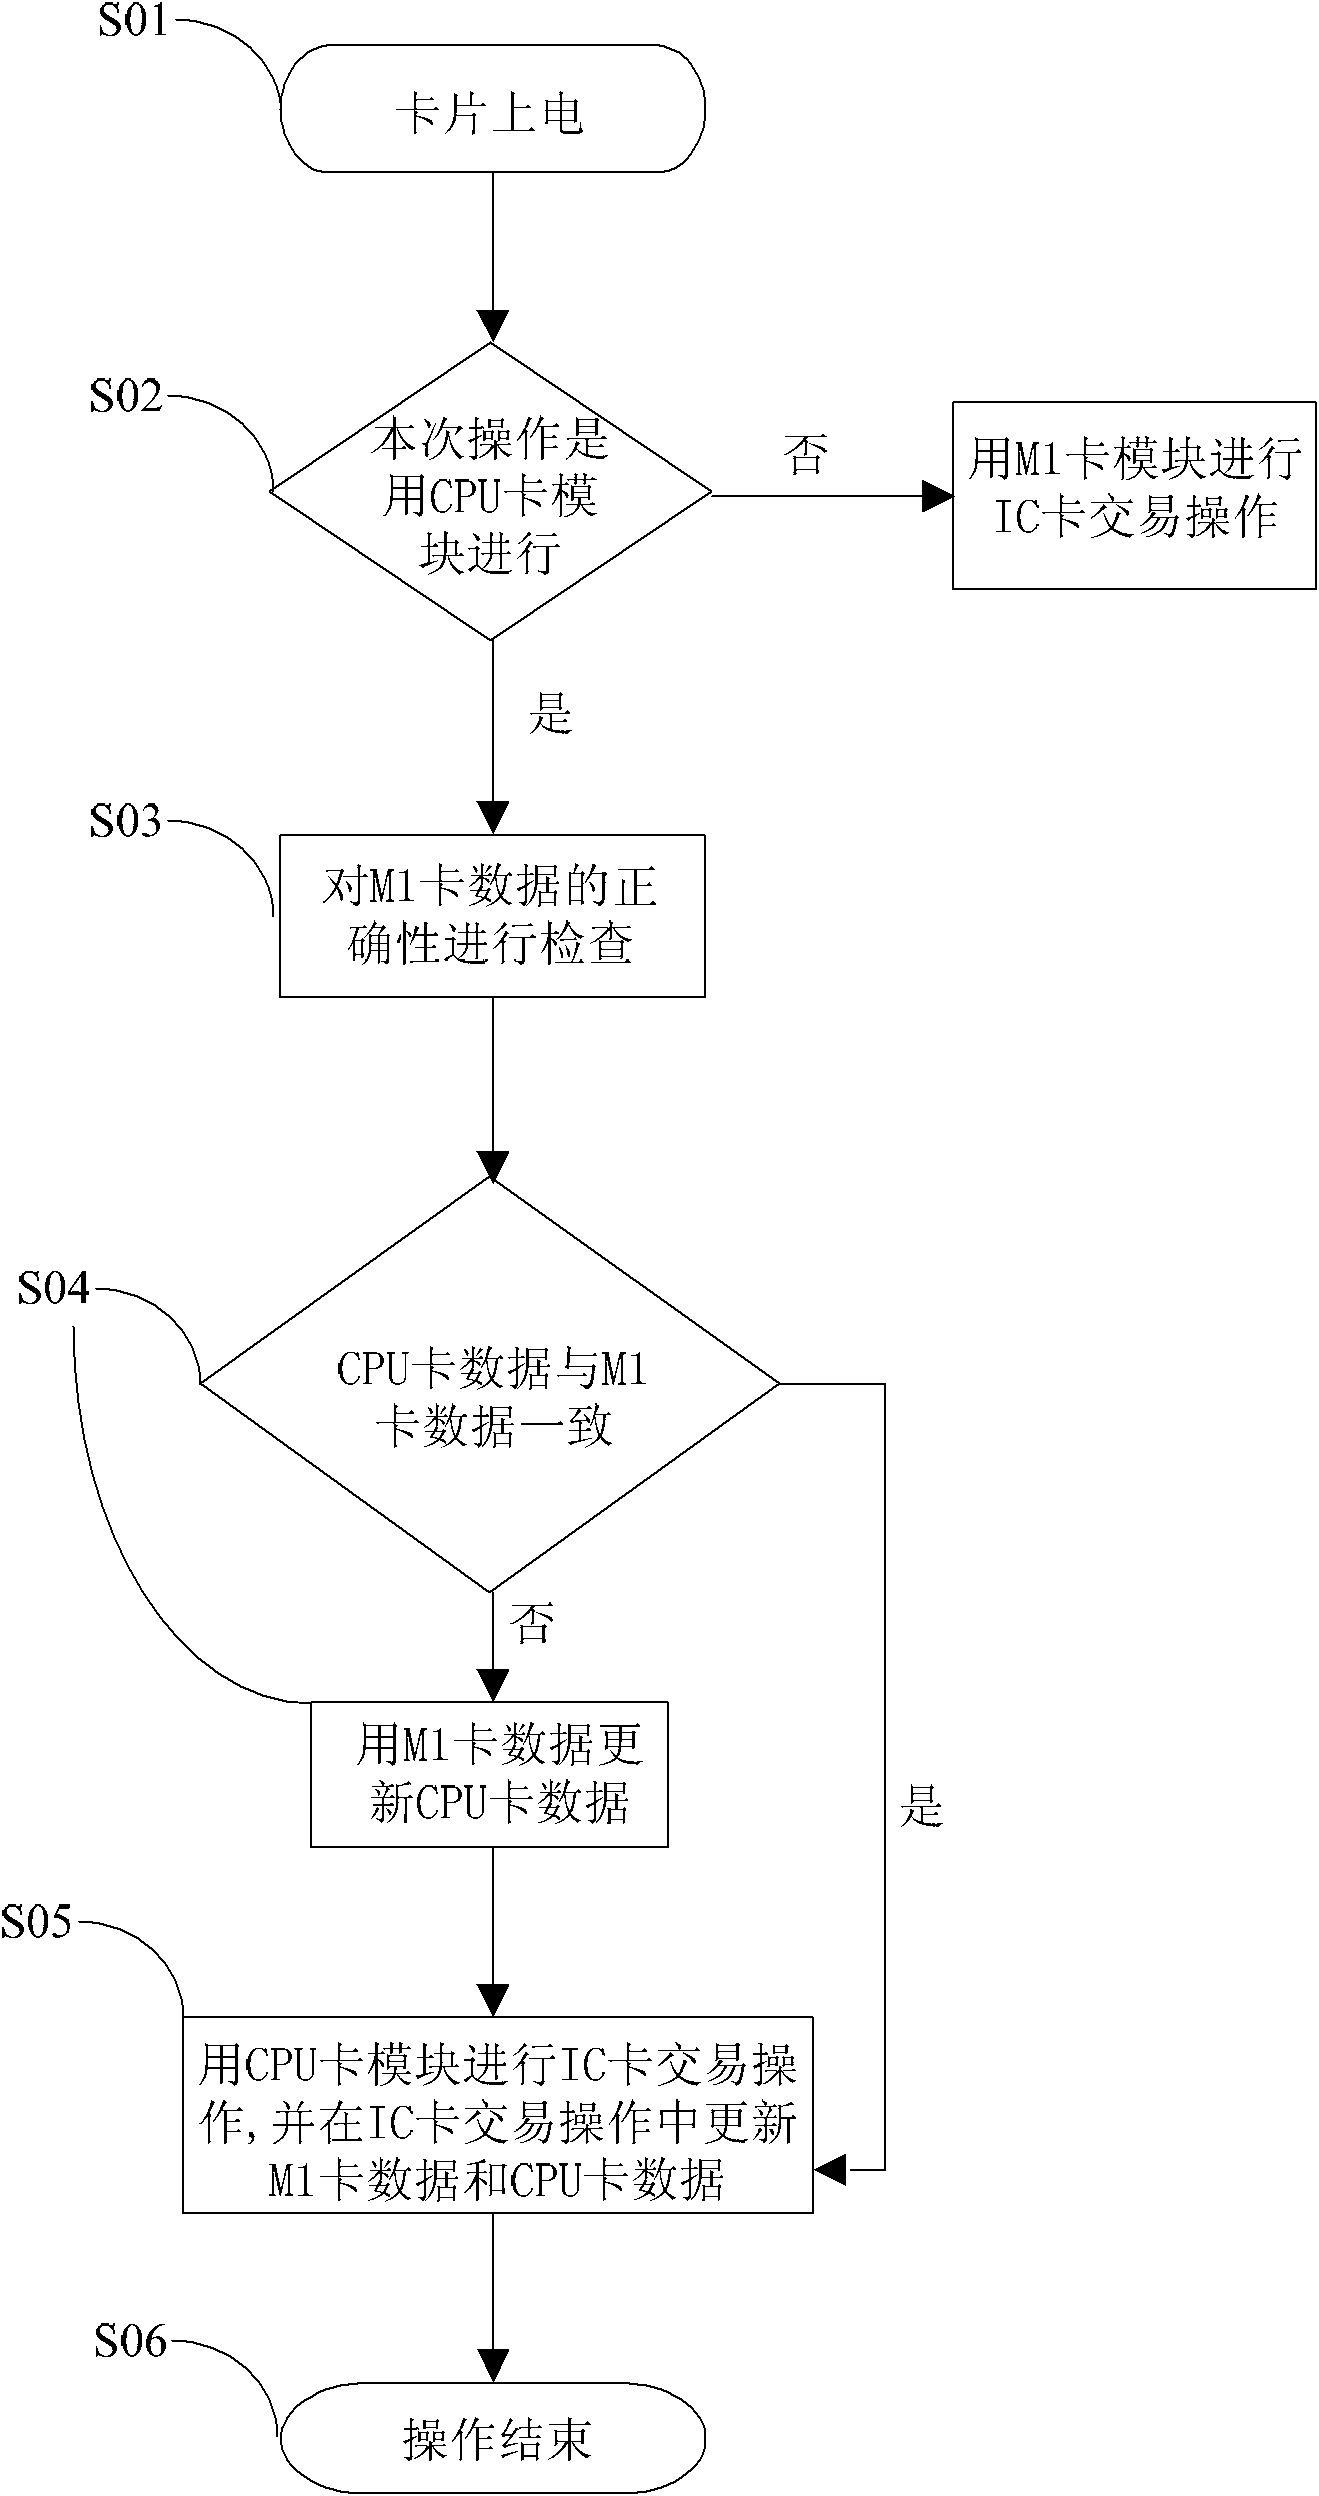 Integrated circuit (IC) card and data updating method thereof